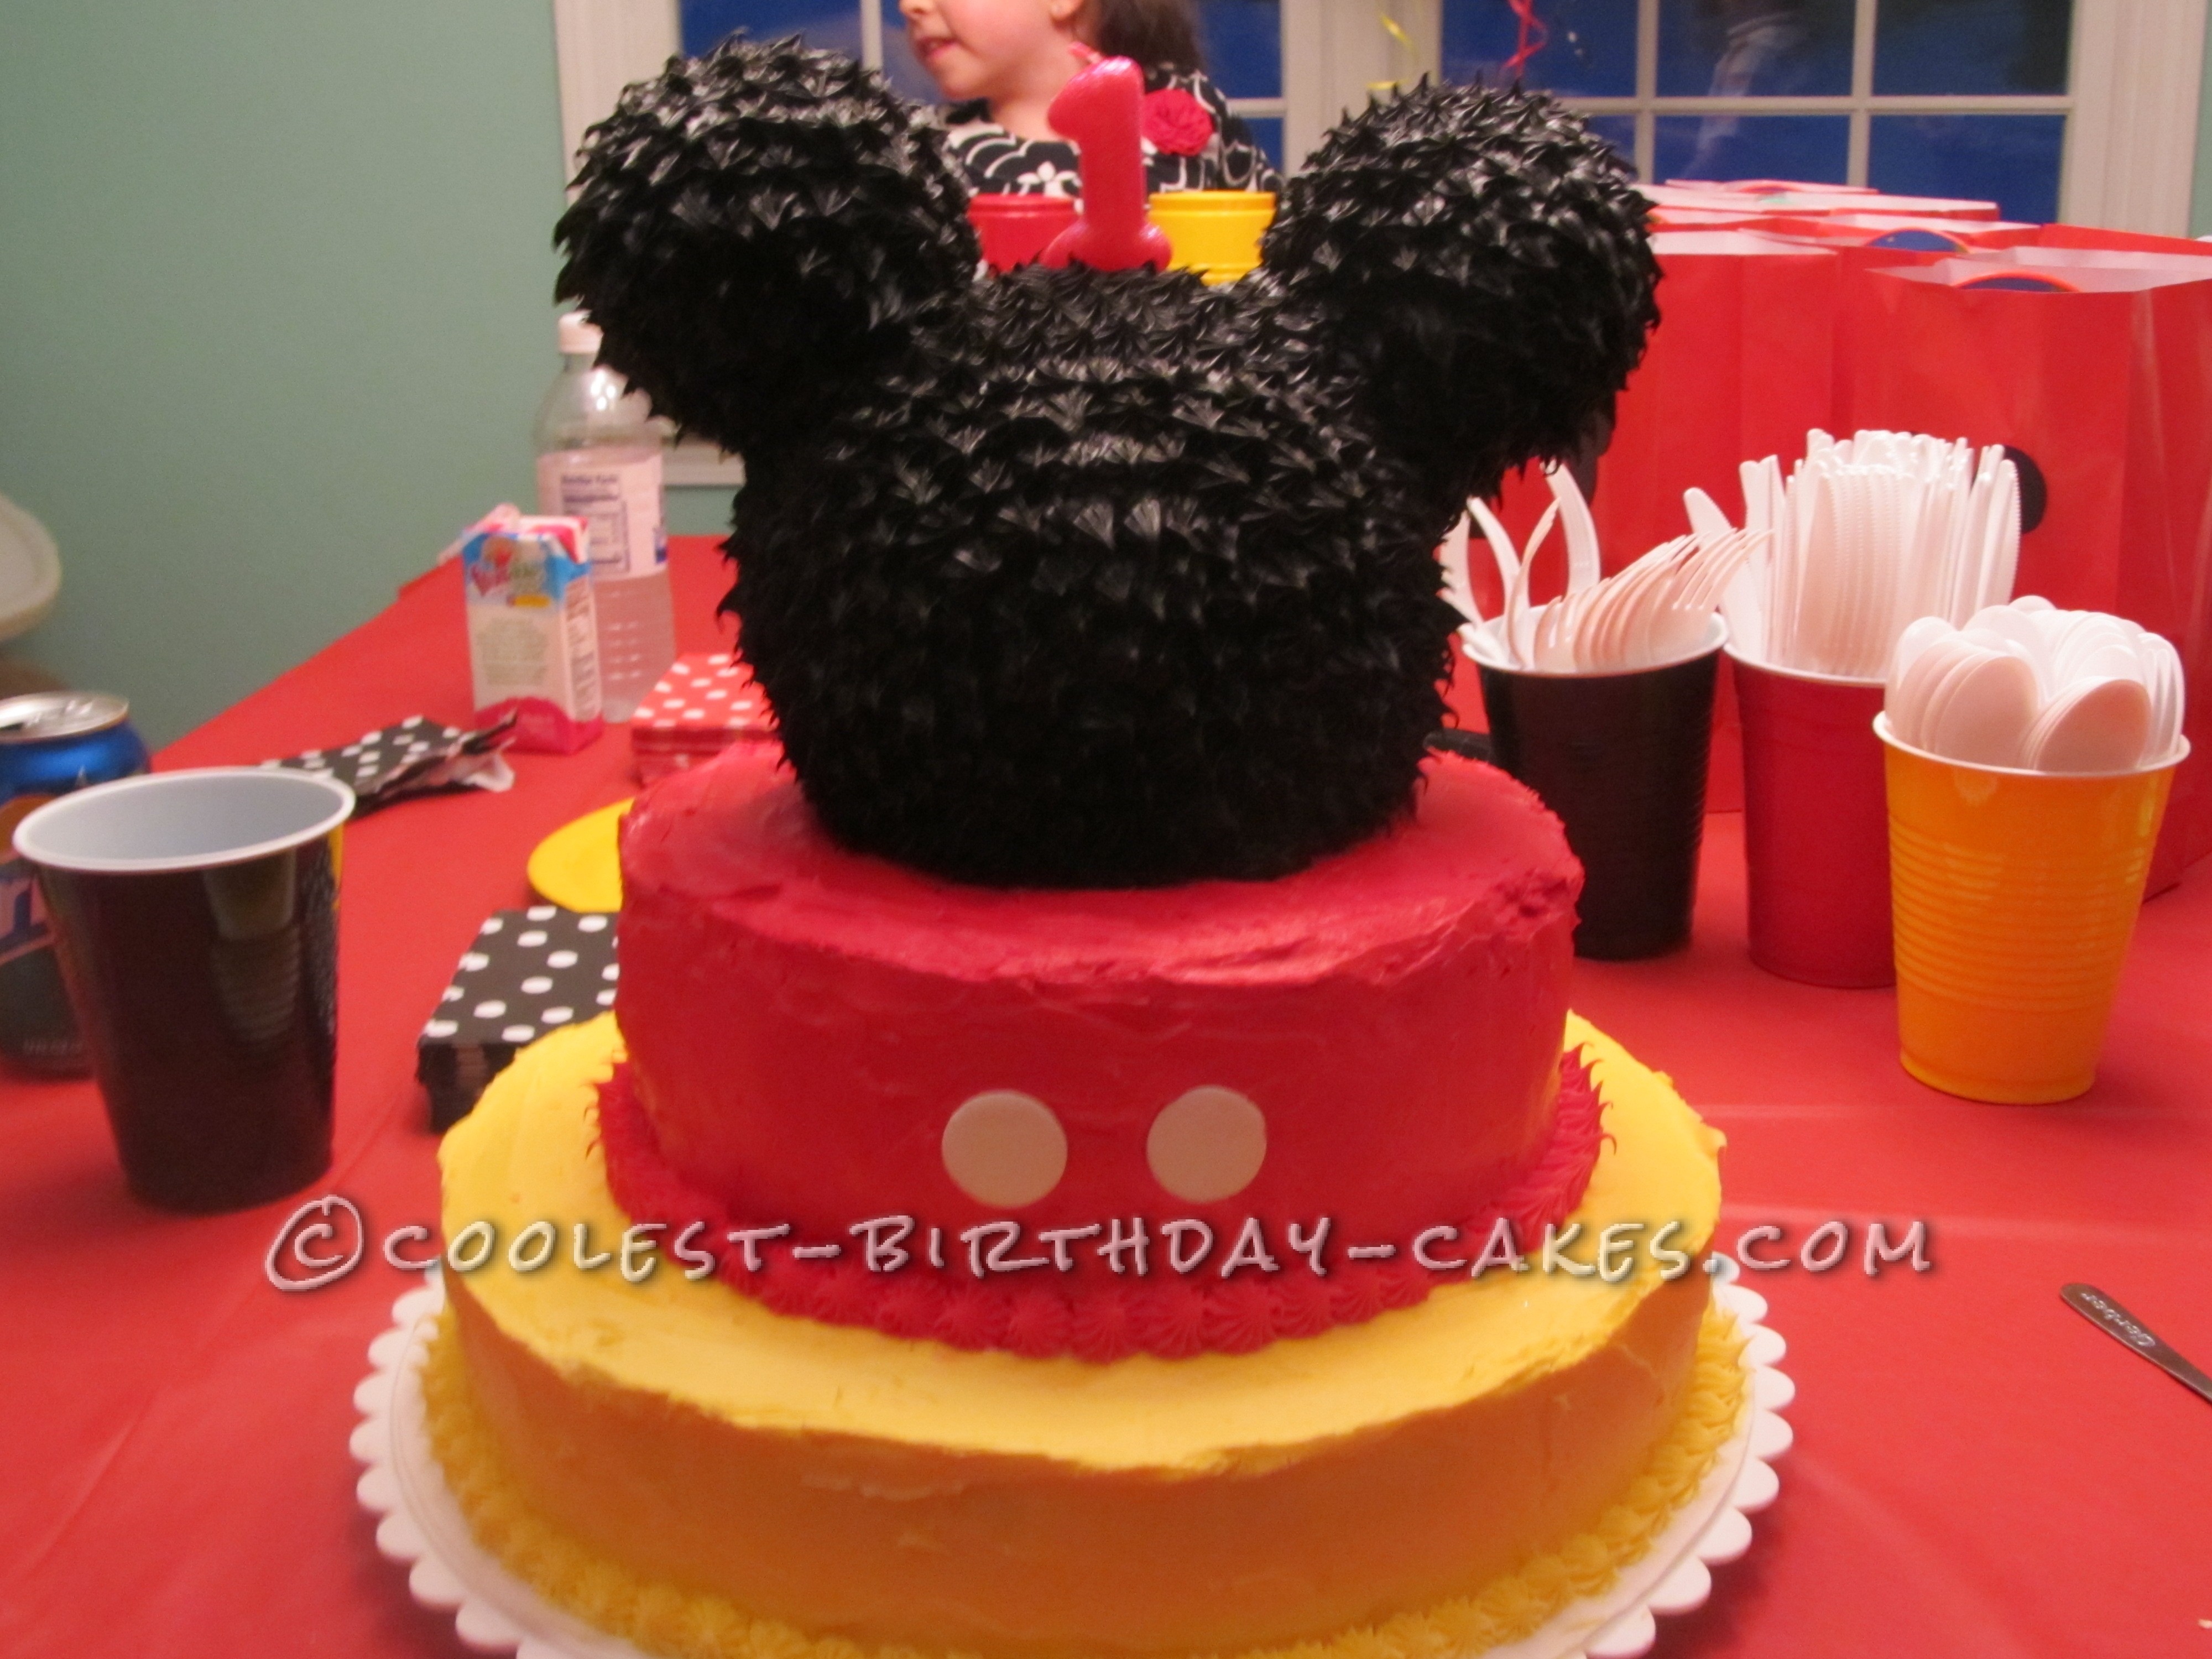 1st Birthday Cake for my Daughter who loves Mickey Mouse